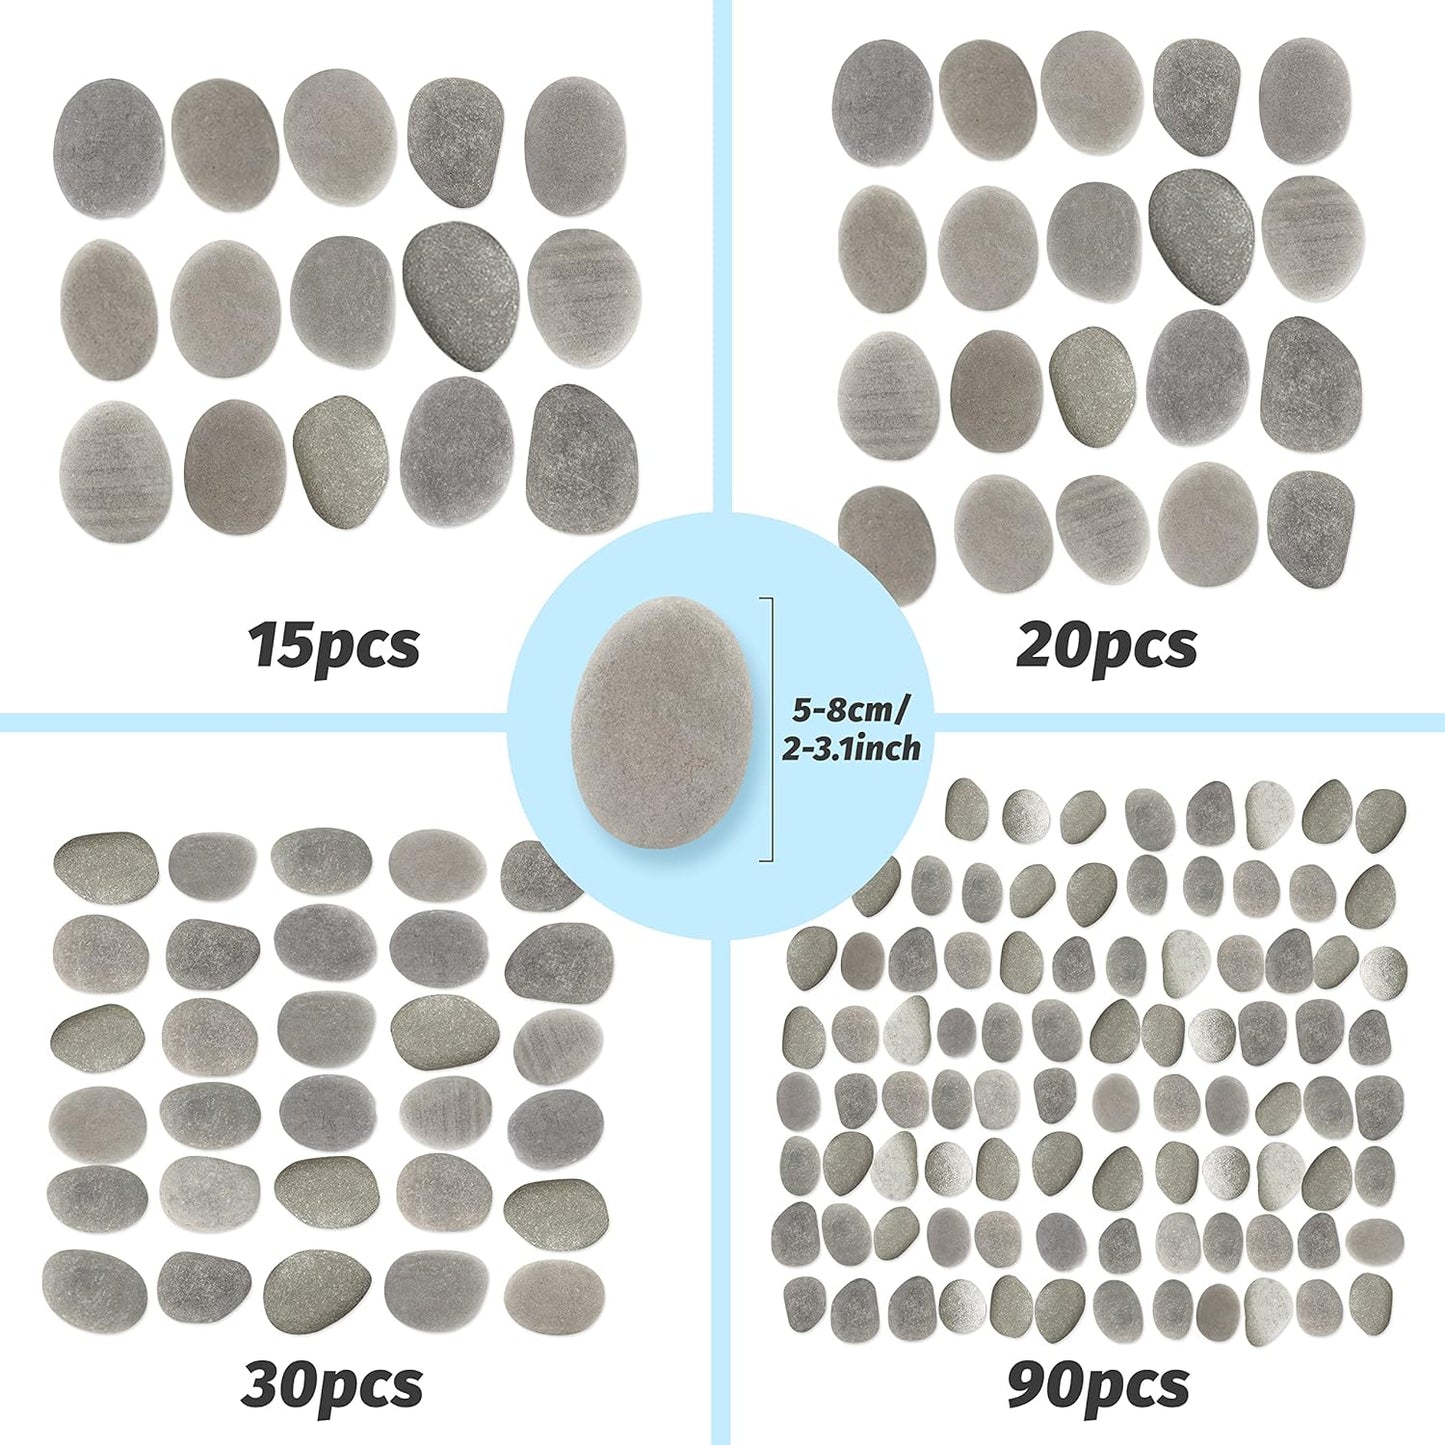 10PCS Large Painting Rocks, Natural River Rocks, Flat Rocks for Painting, 2-3 Inches Stones for Arts & Crafting